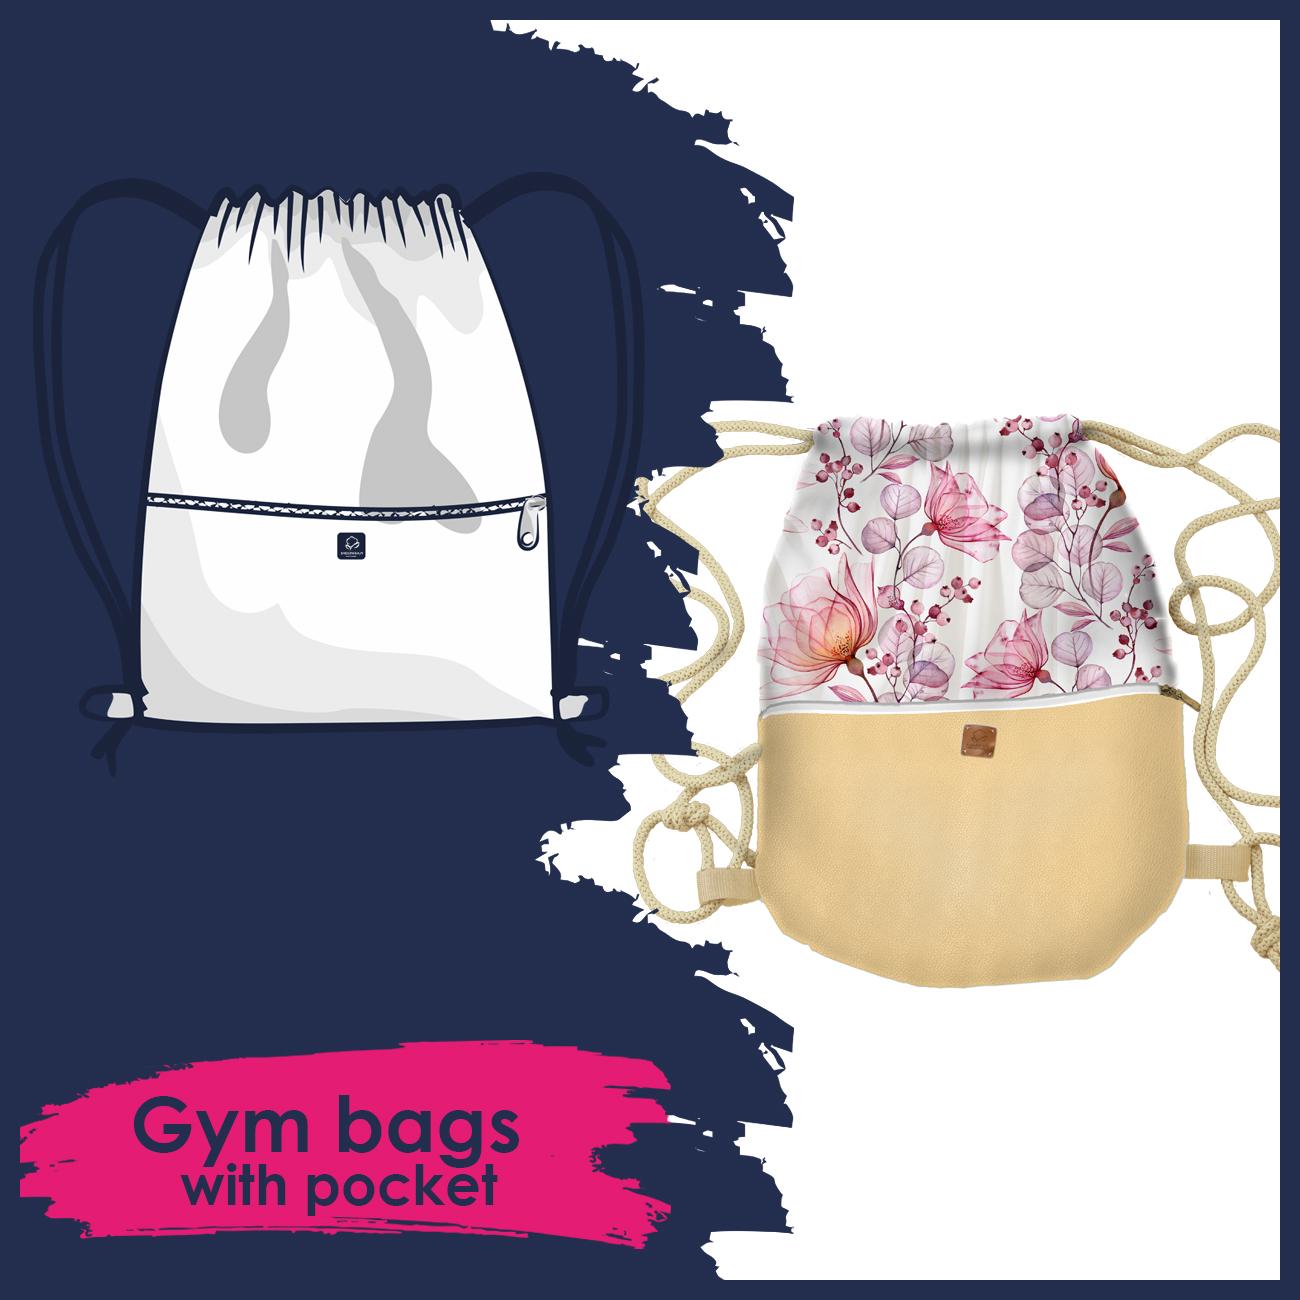 Gym bags with pocket